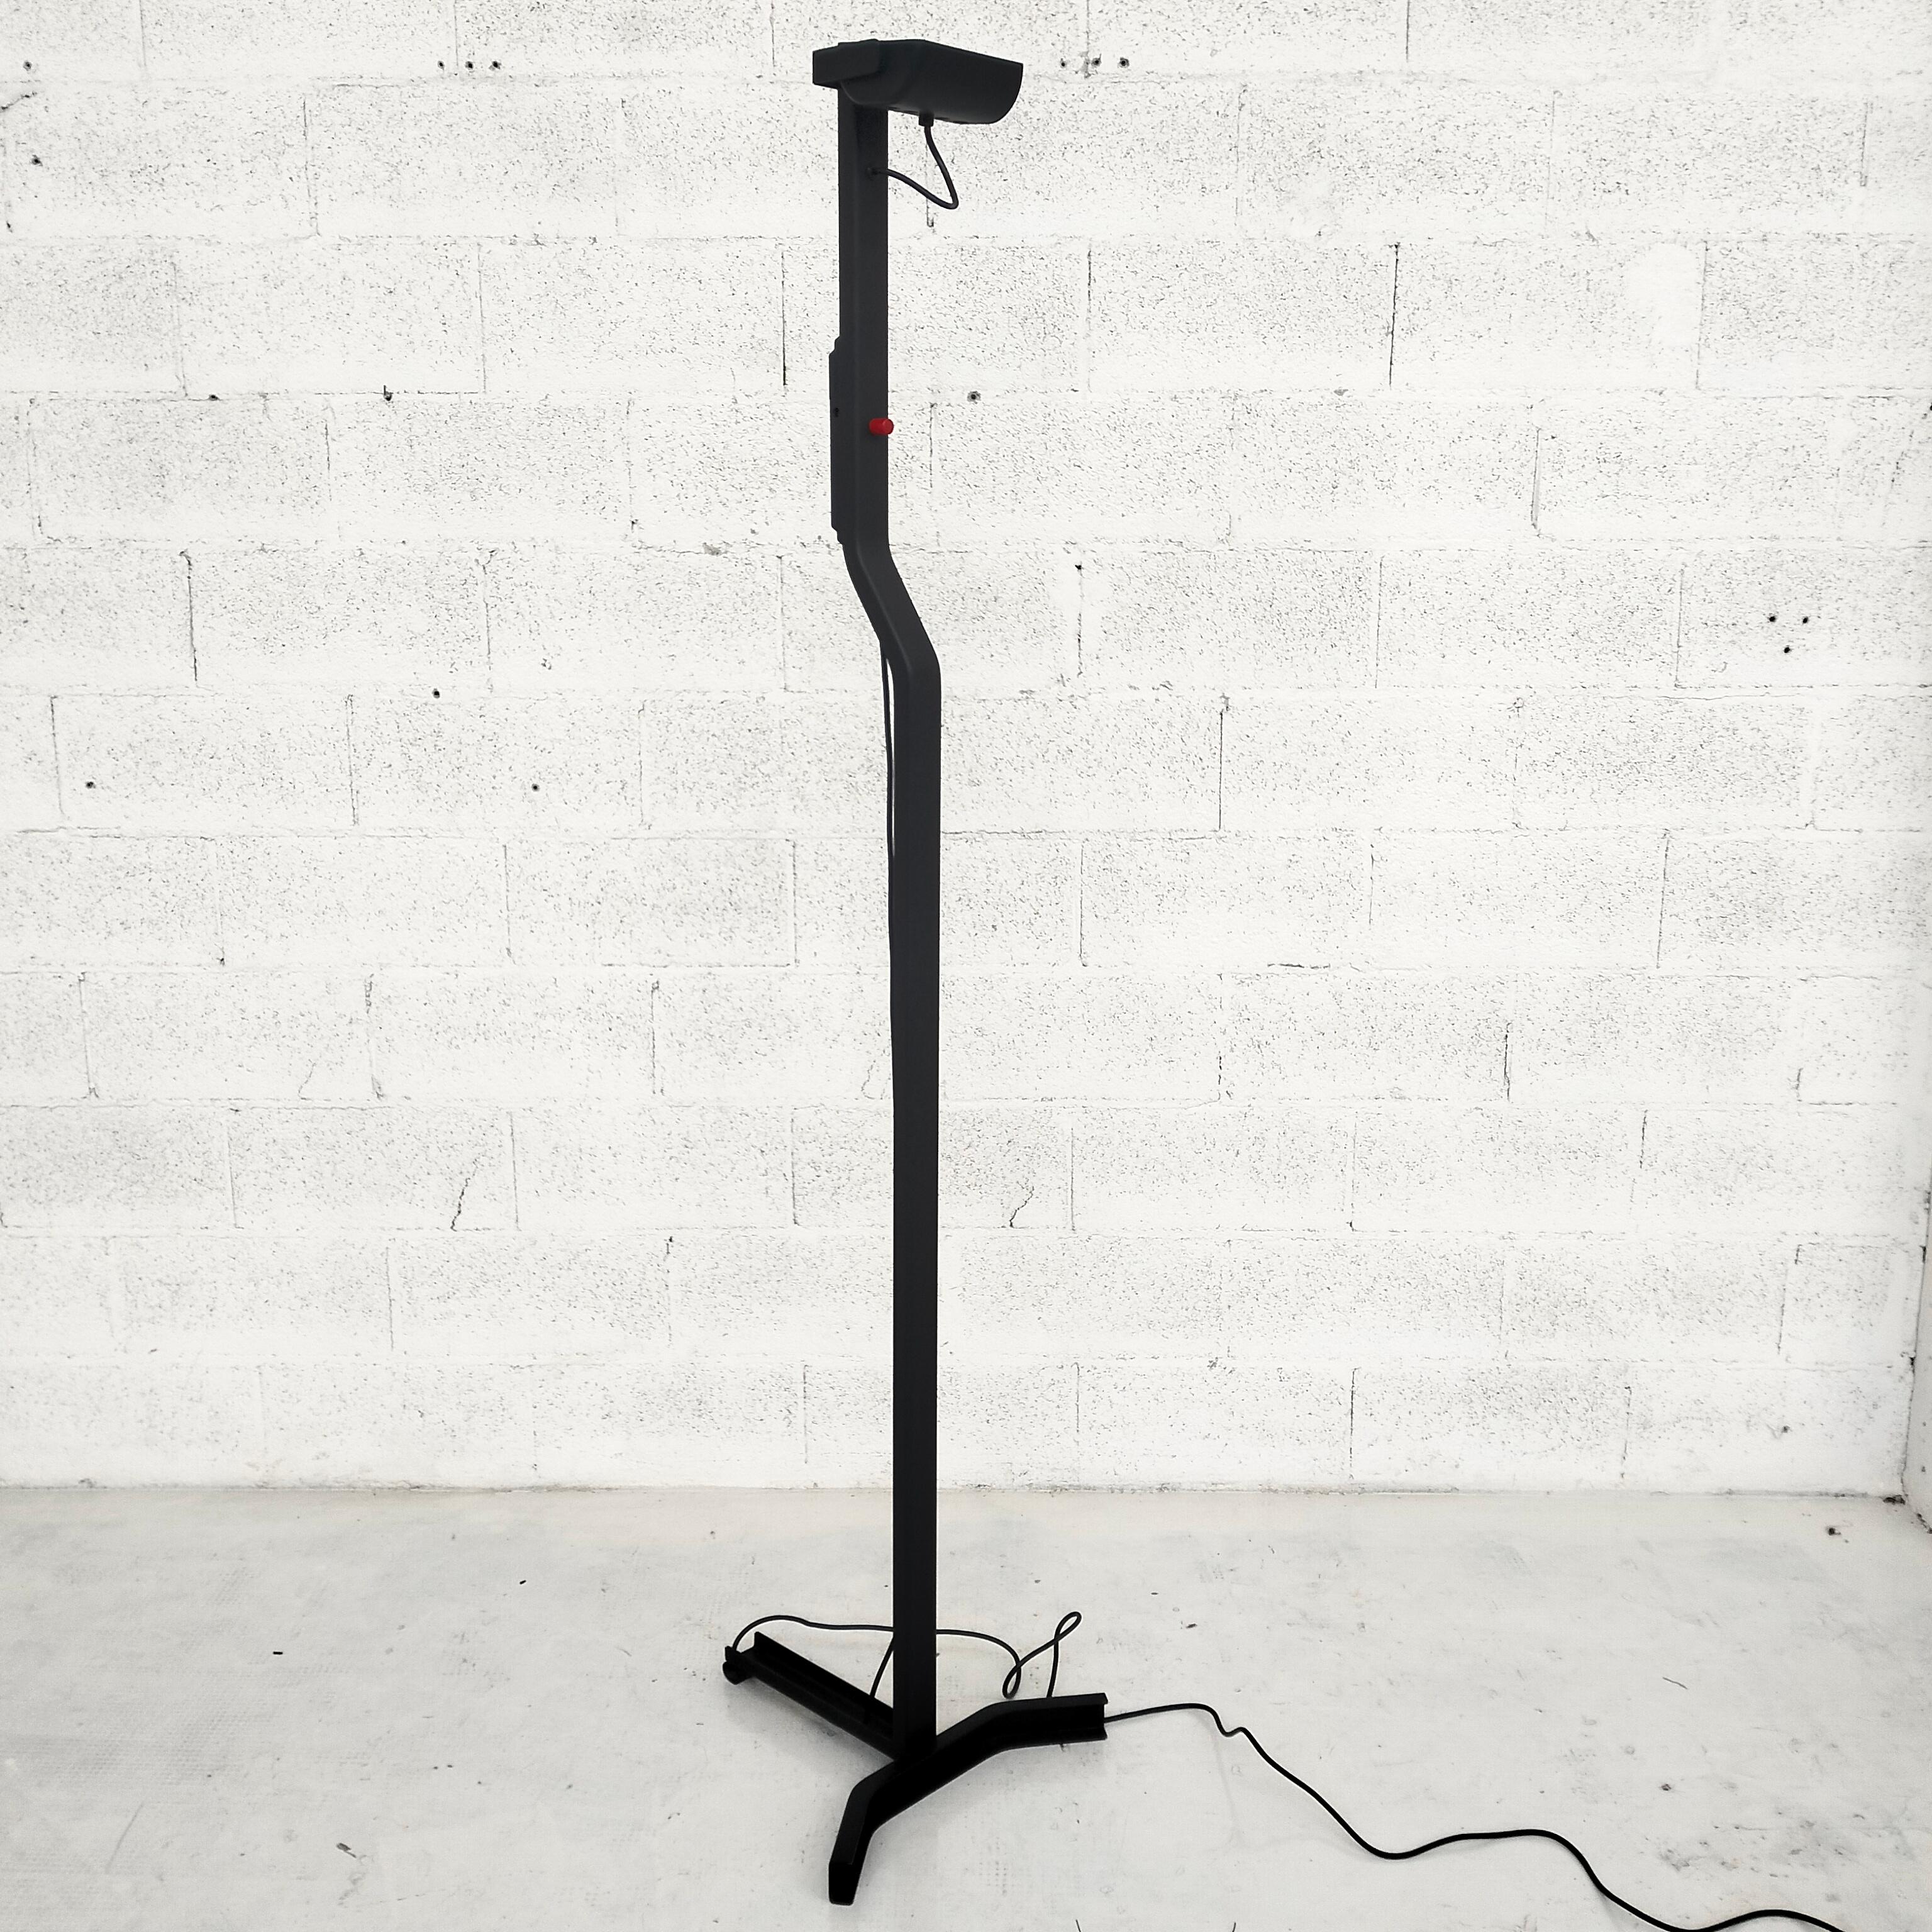 Black halogen floor lamp Sirio model designed by Kazuhide Takahama and manufactured by Sirrah, Italy 1977. 
Matt black painted metal floor lamp with red switch.
The whole C-beam structure C-confers a Minimalist appeal.
Very good